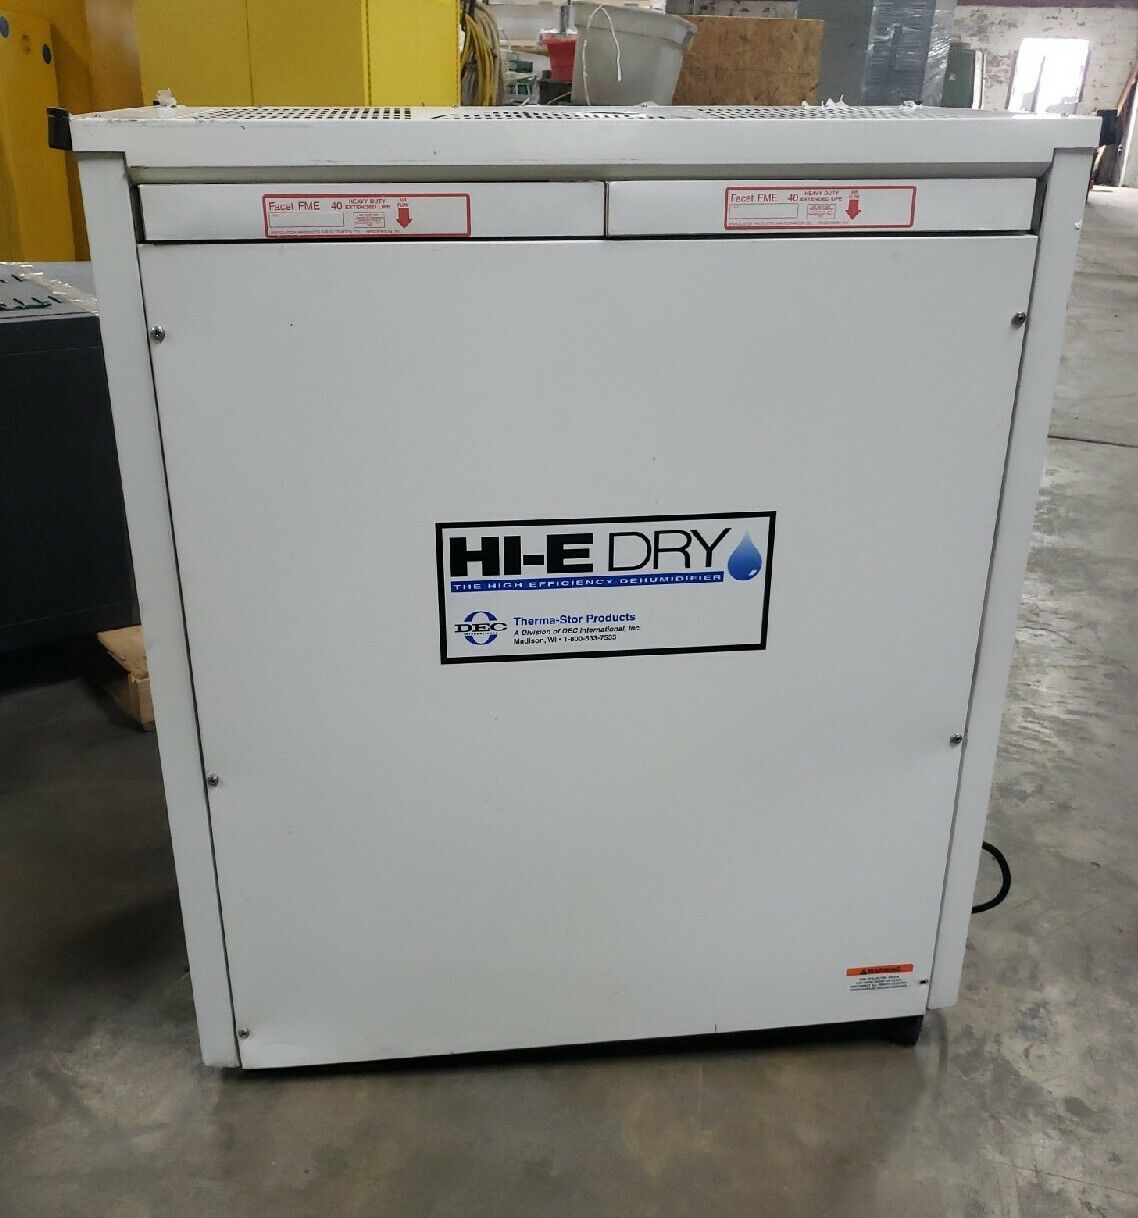 Therma-Stor Hi-E Dry 195 120V Dehumidifier - Clean & Fully Functional